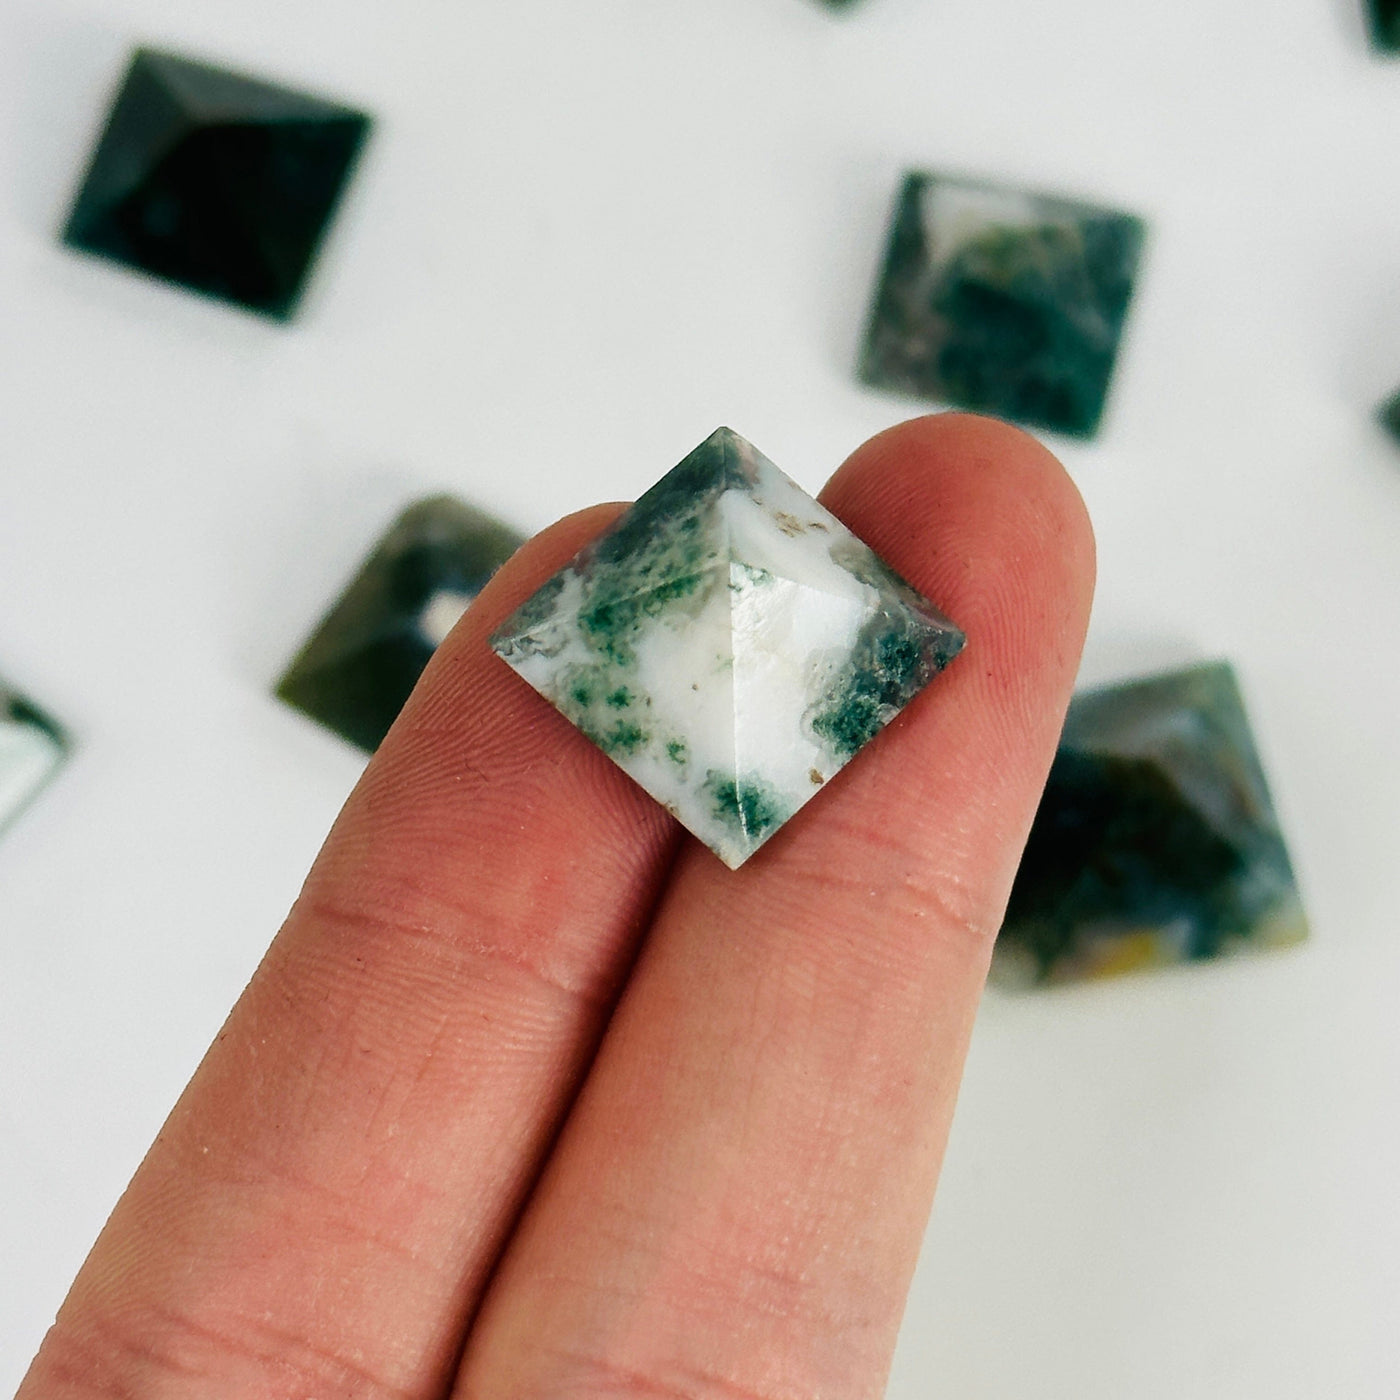 fingers holding up moss agate pyramid with others in the background